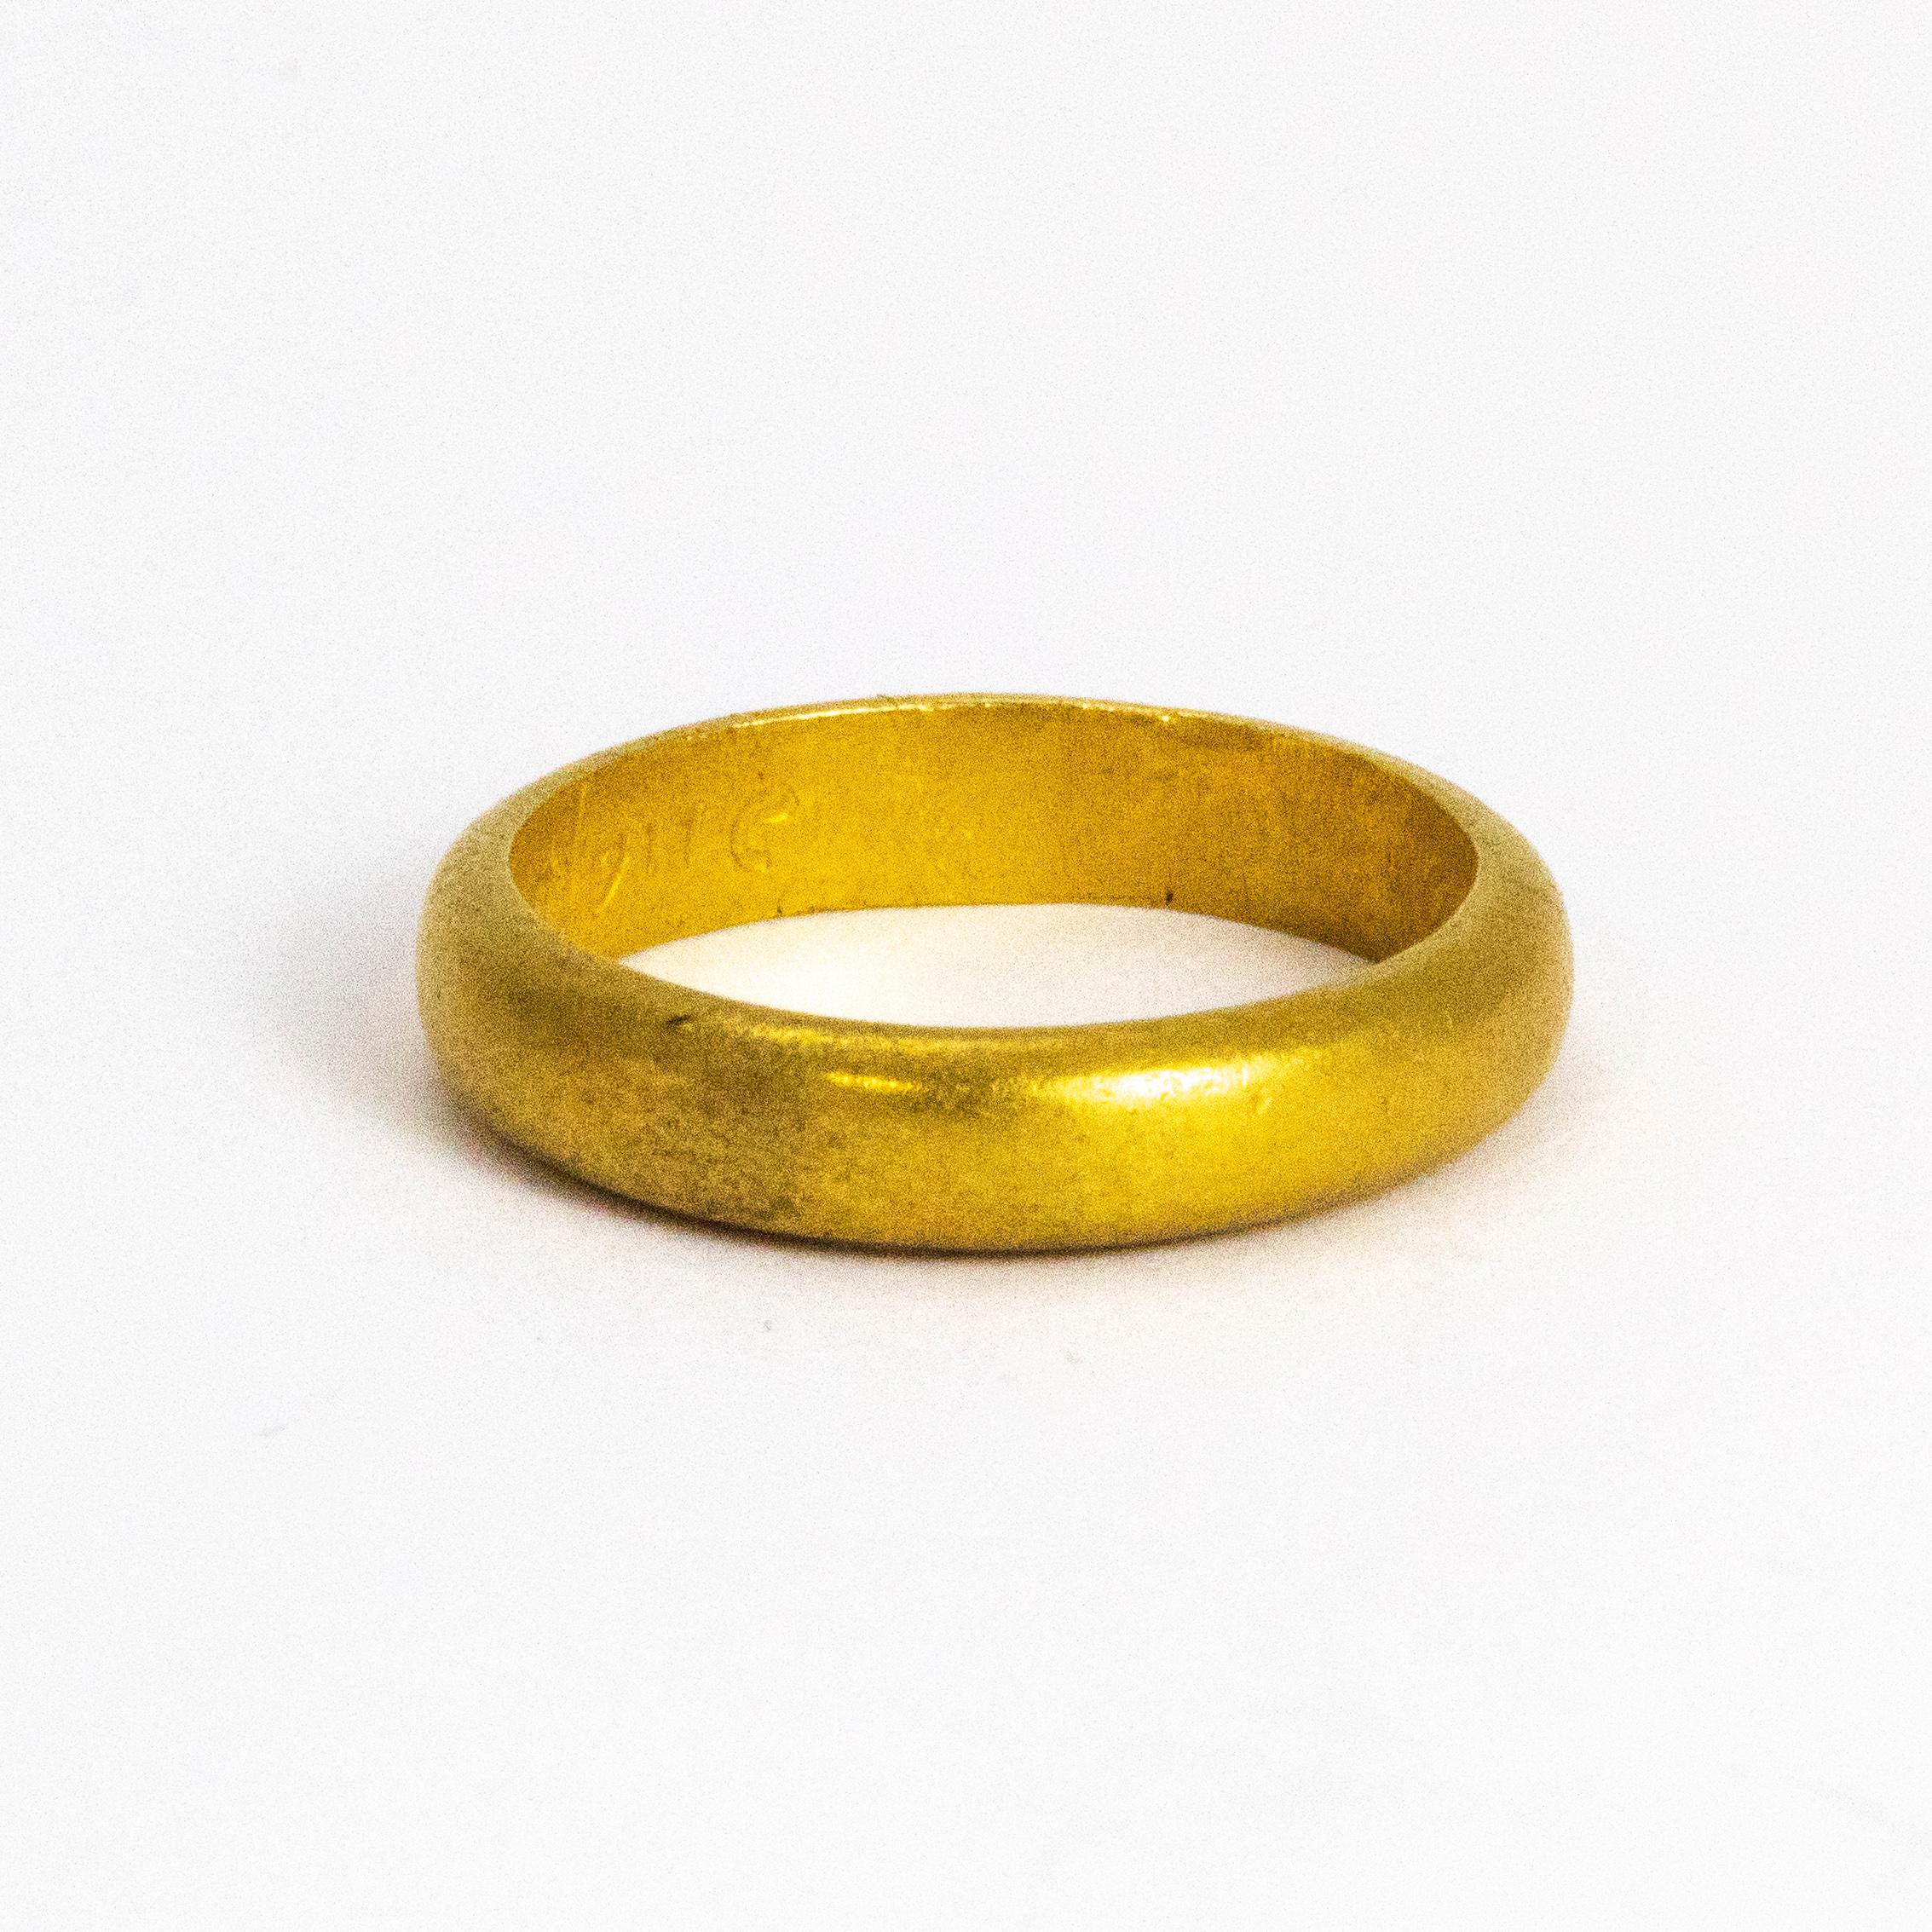 George I Late 17th-Early 18th Century 18 Karat Gold Posy Ring